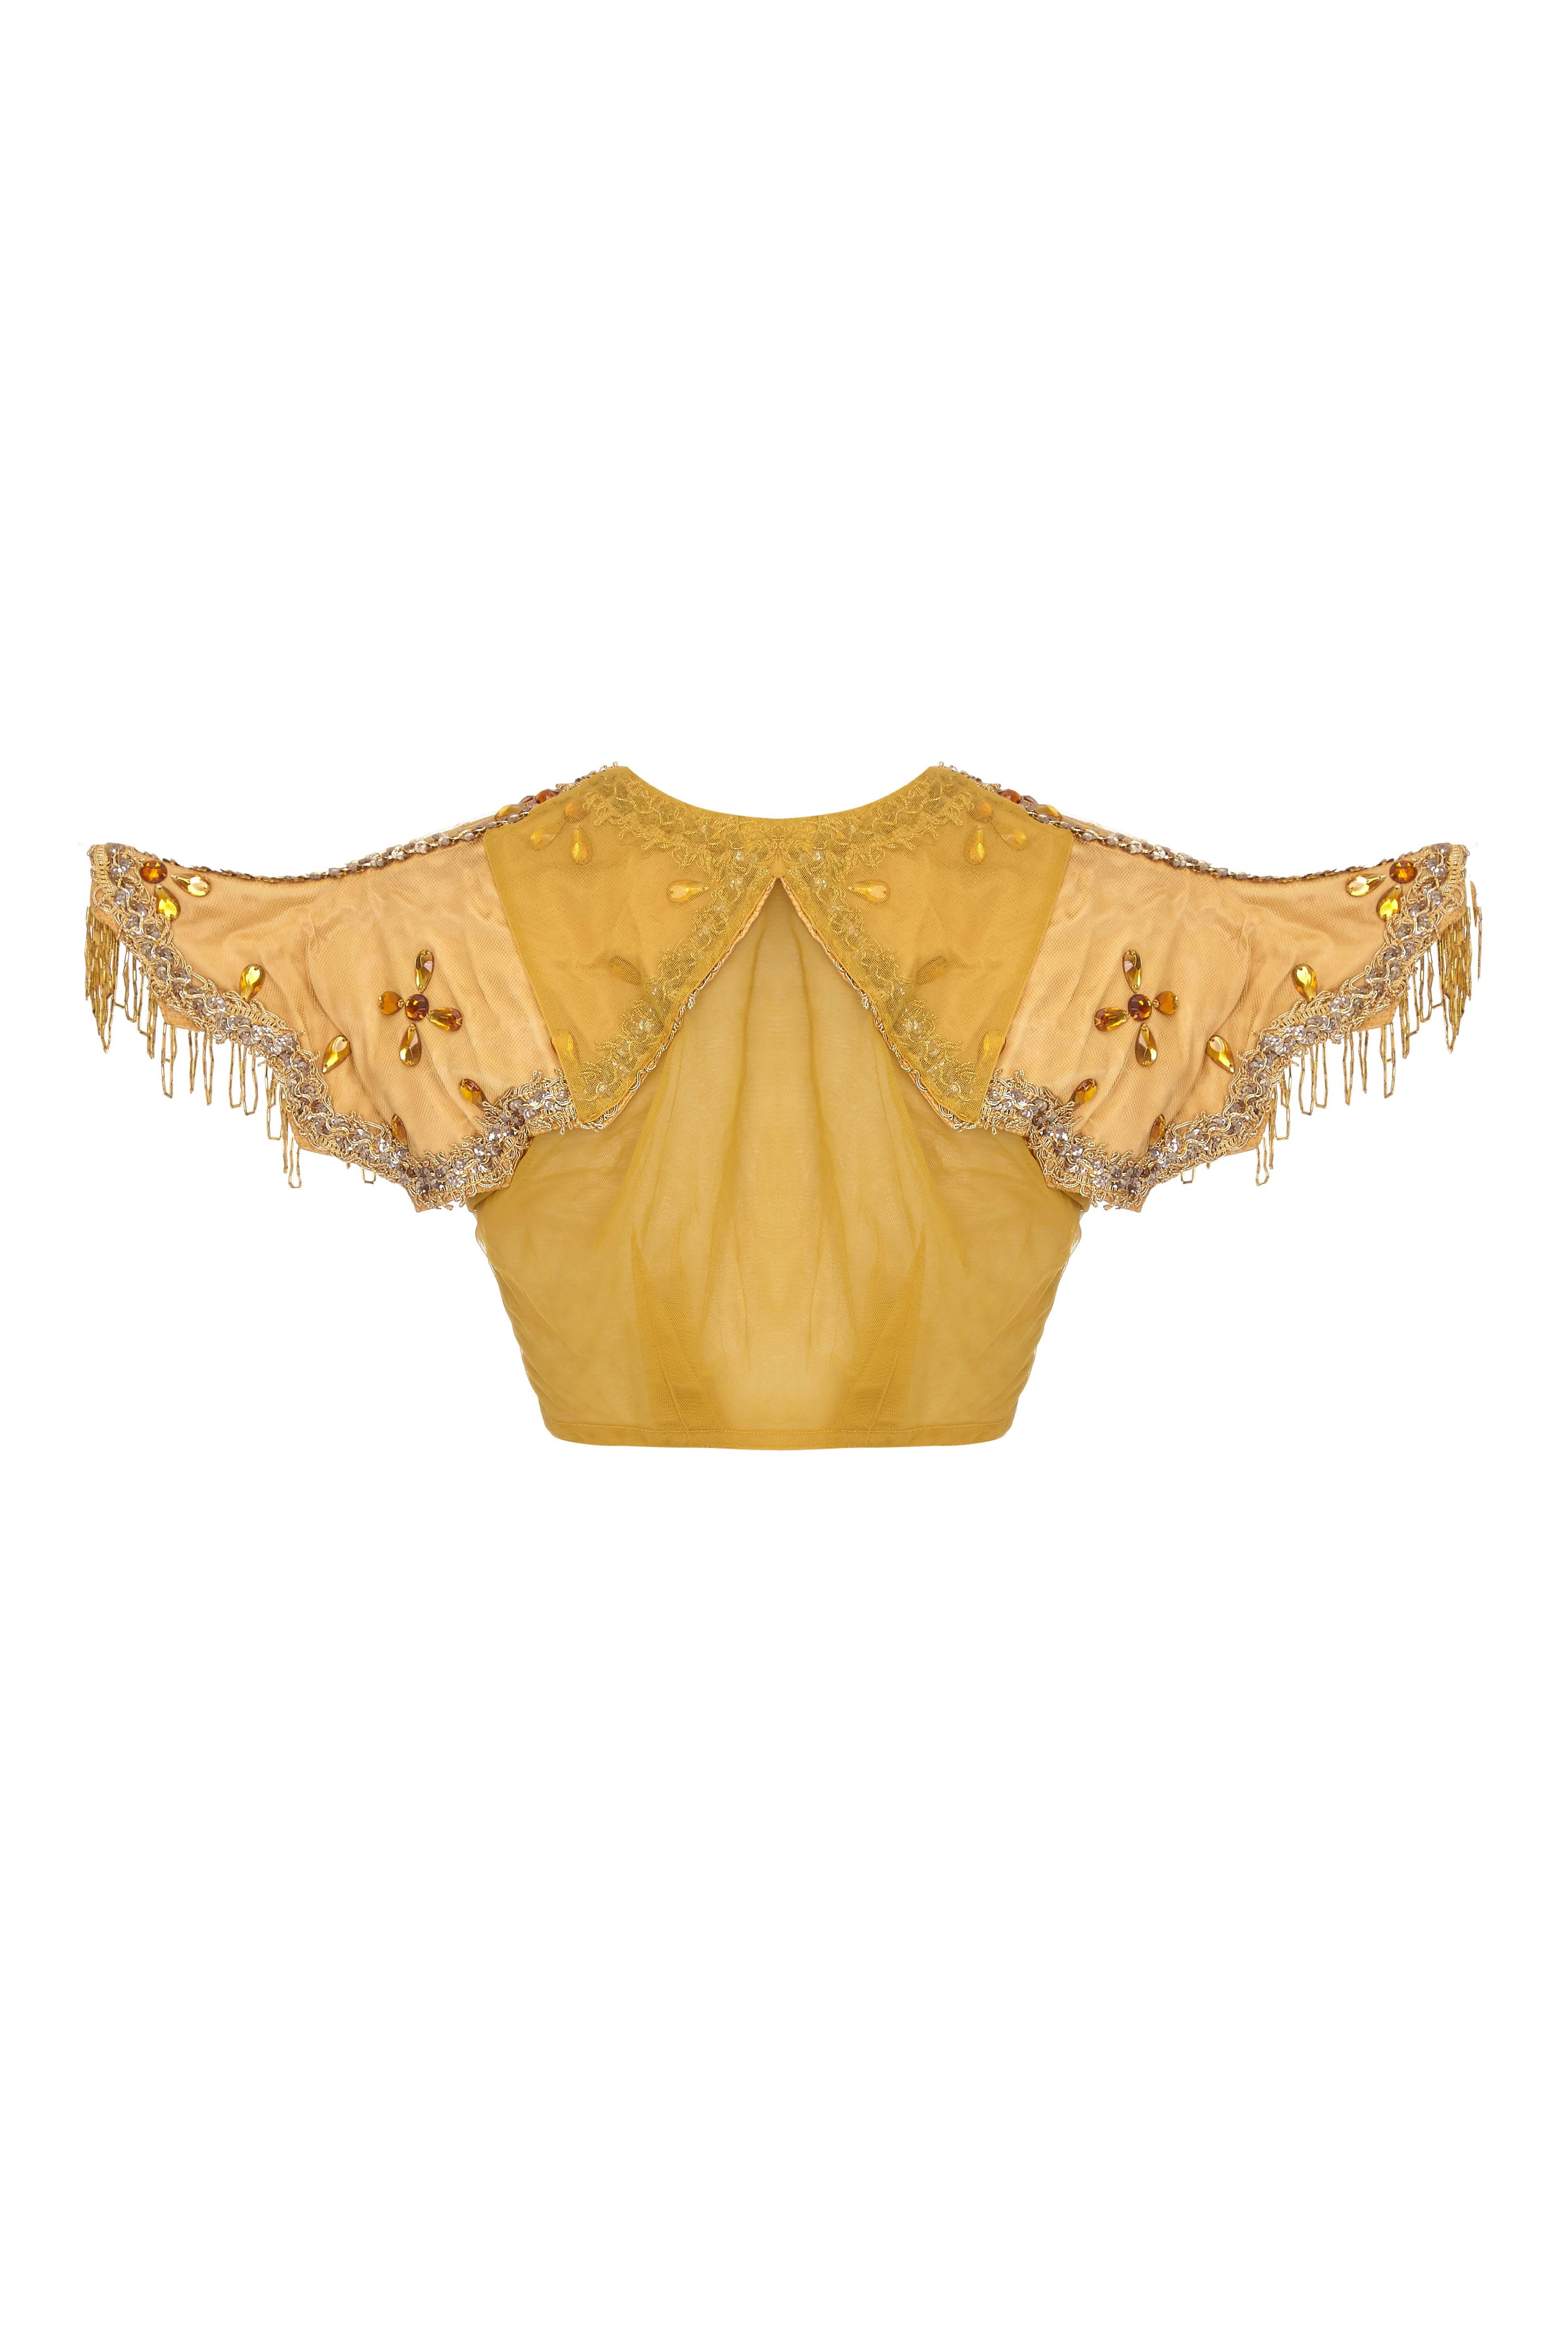 Incredible vintage 1930s Mardi Gras costume from New Orleans with exaggerated shaped and tassled shoulders.  The body of the top if made of a gold mesh and is heavily embellished with gold cord, sequins and jewels.  It is cropped and fastens under